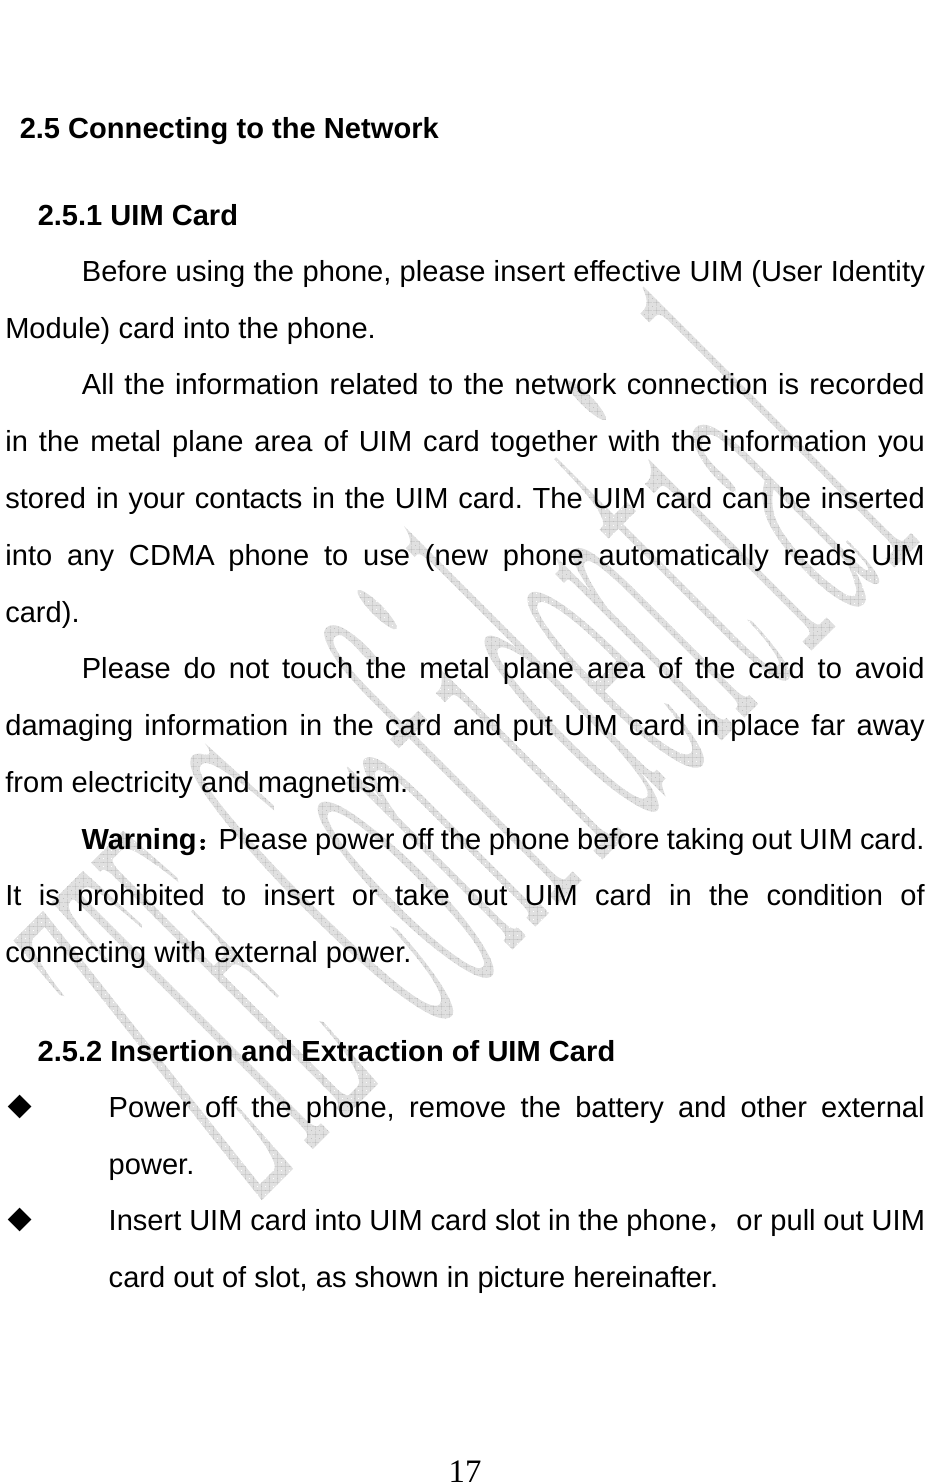                              172.5 Connecting to the Network 2.5.1 UIM Card Before using the phone, please insert effective UIM (User Identity Module) card into the phone.   All the information related to the network connection is recorded in the metal plane area of UIM card together with the information you stored in your contacts in the UIM card. The UIM card can be inserted into any CDMA phone to use (new phone automatically reads UIM card). Please do not touch the metal plane area of the card to avoid damaging information in the card and put UIM card in place far away from electricity and magnetism. Warning：Please power off the phone before taking out UIM card. It is prohibited to insert or take out UIM card in the condition of connecting with external power.  2.5.2 Insertion and Extraction of UIM Card   Power off the phone, remove the battery and other external power.   Insert UIM card into UIM card slot in the phone，or pull out UIM card out of slot, as shown in picture hereinafter. 